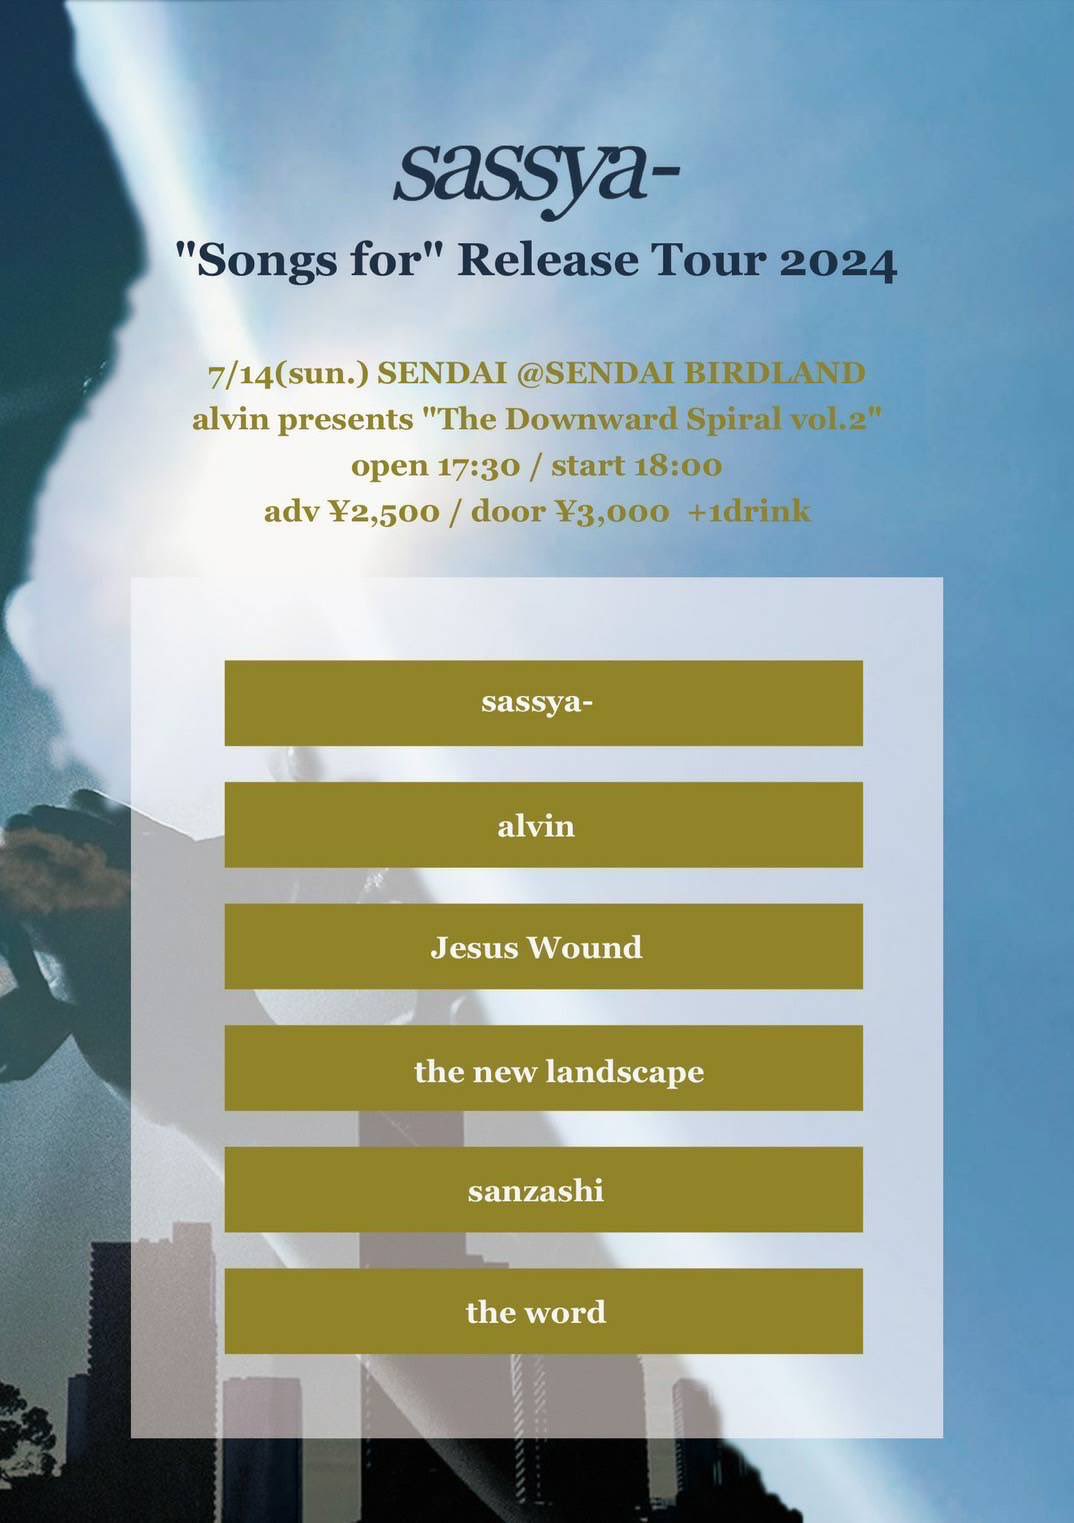 sassya- Songs for Release Tour 2024